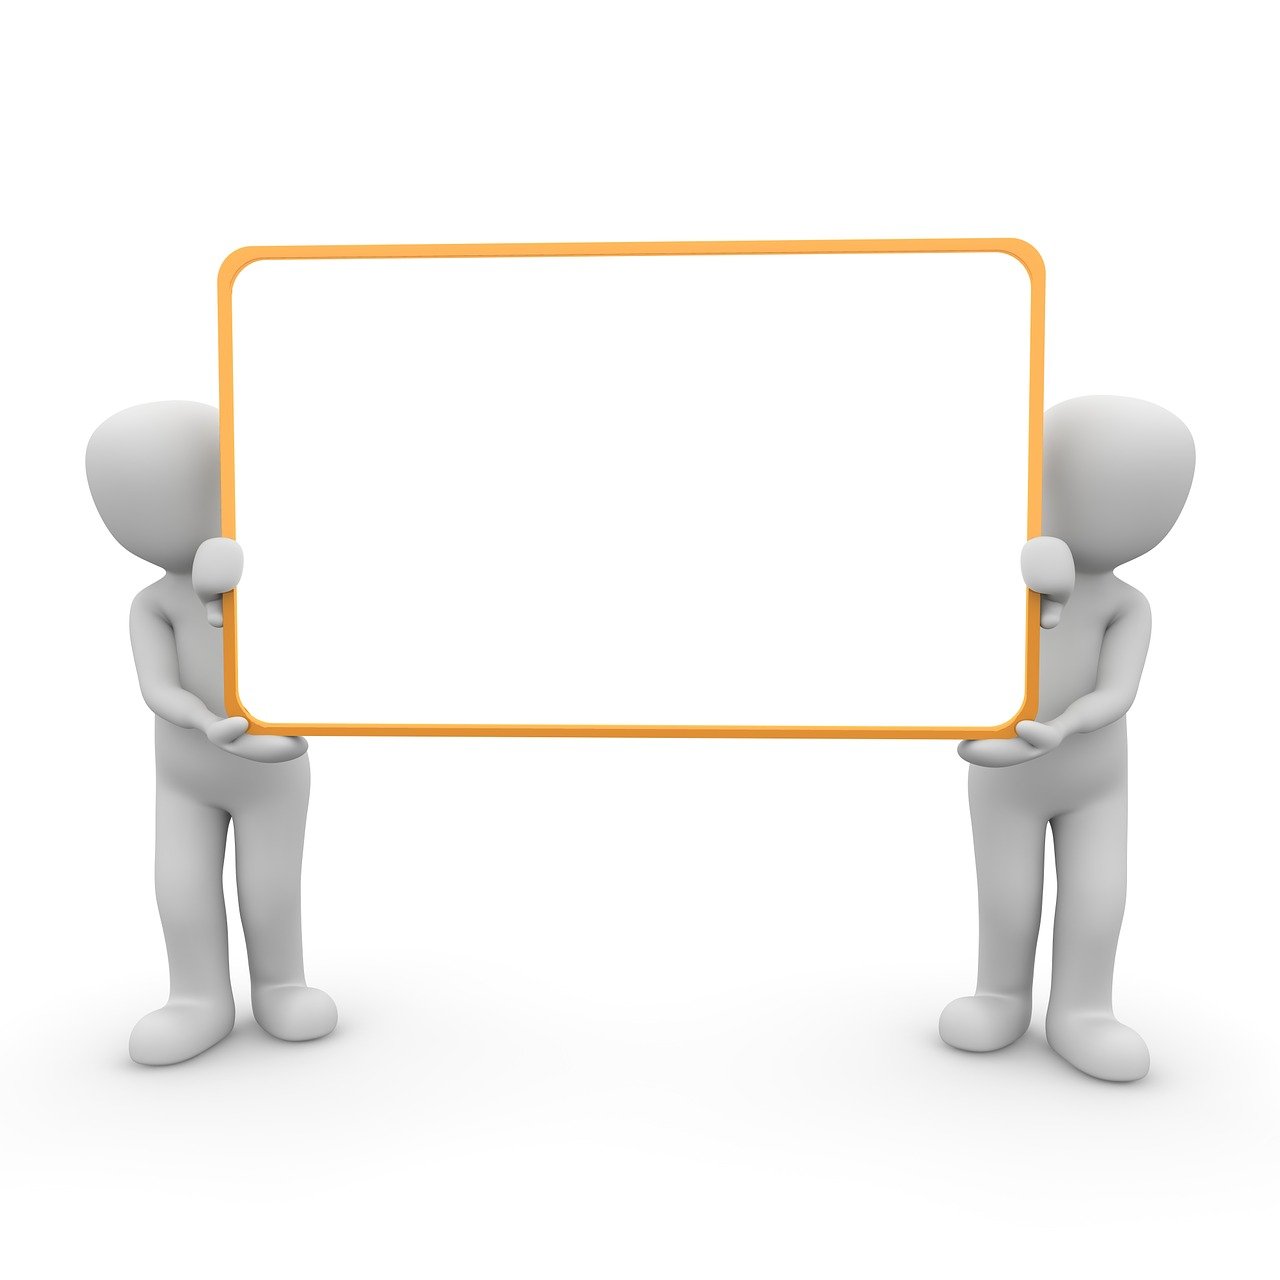 a couple of people that are holding a sign, by James Morris, computer art, background is white and blank, white and orange, whiteboard, designed in blender